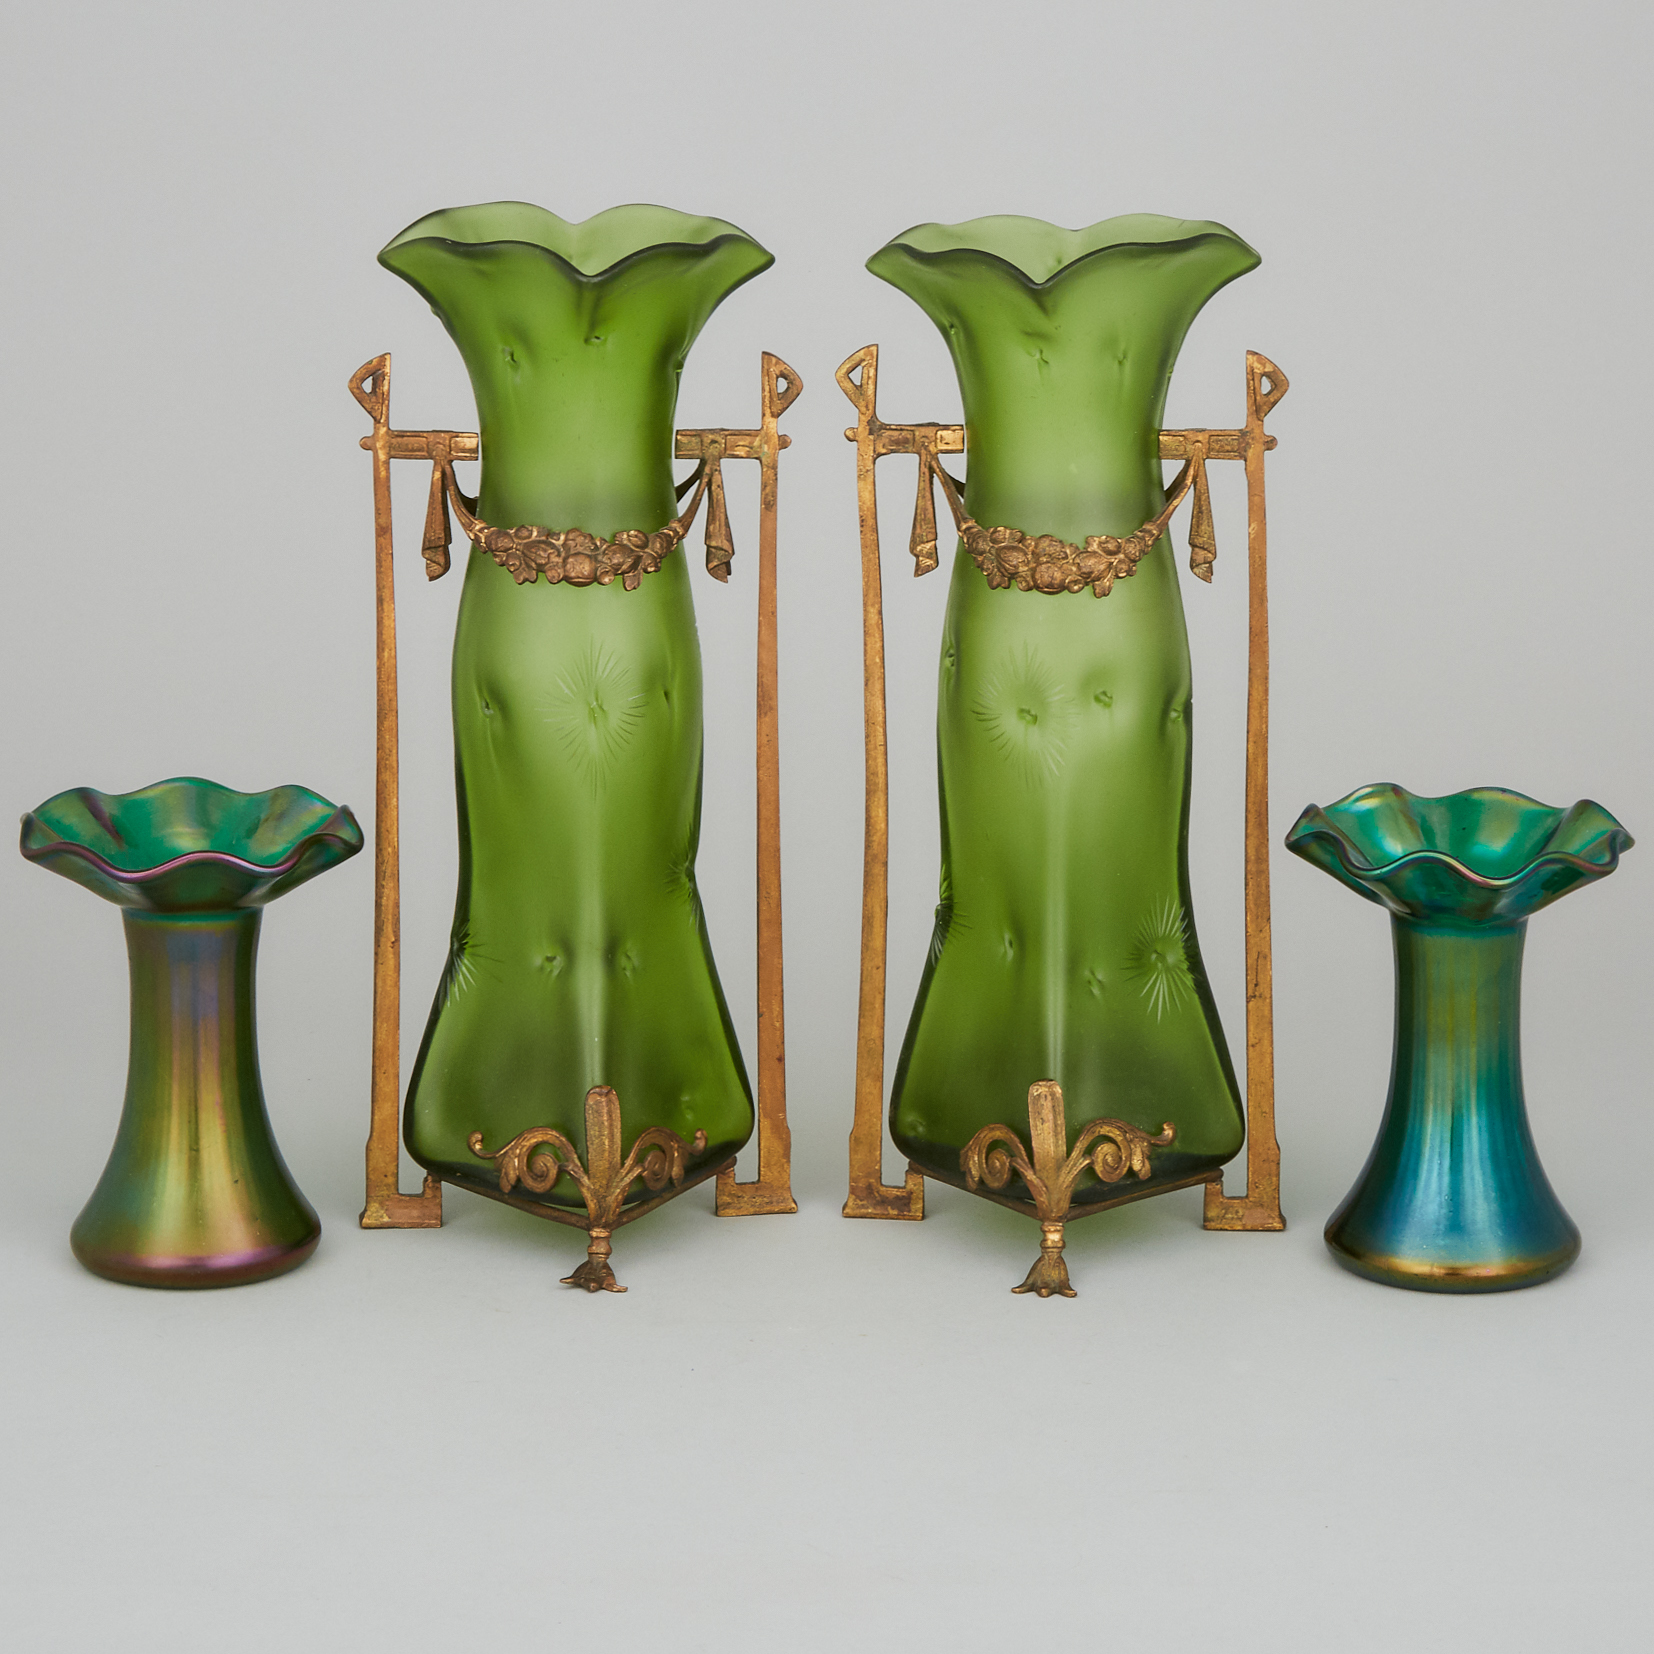 Two Pairs of Bohemian Iridescent Green Glass Vases, early 20th century